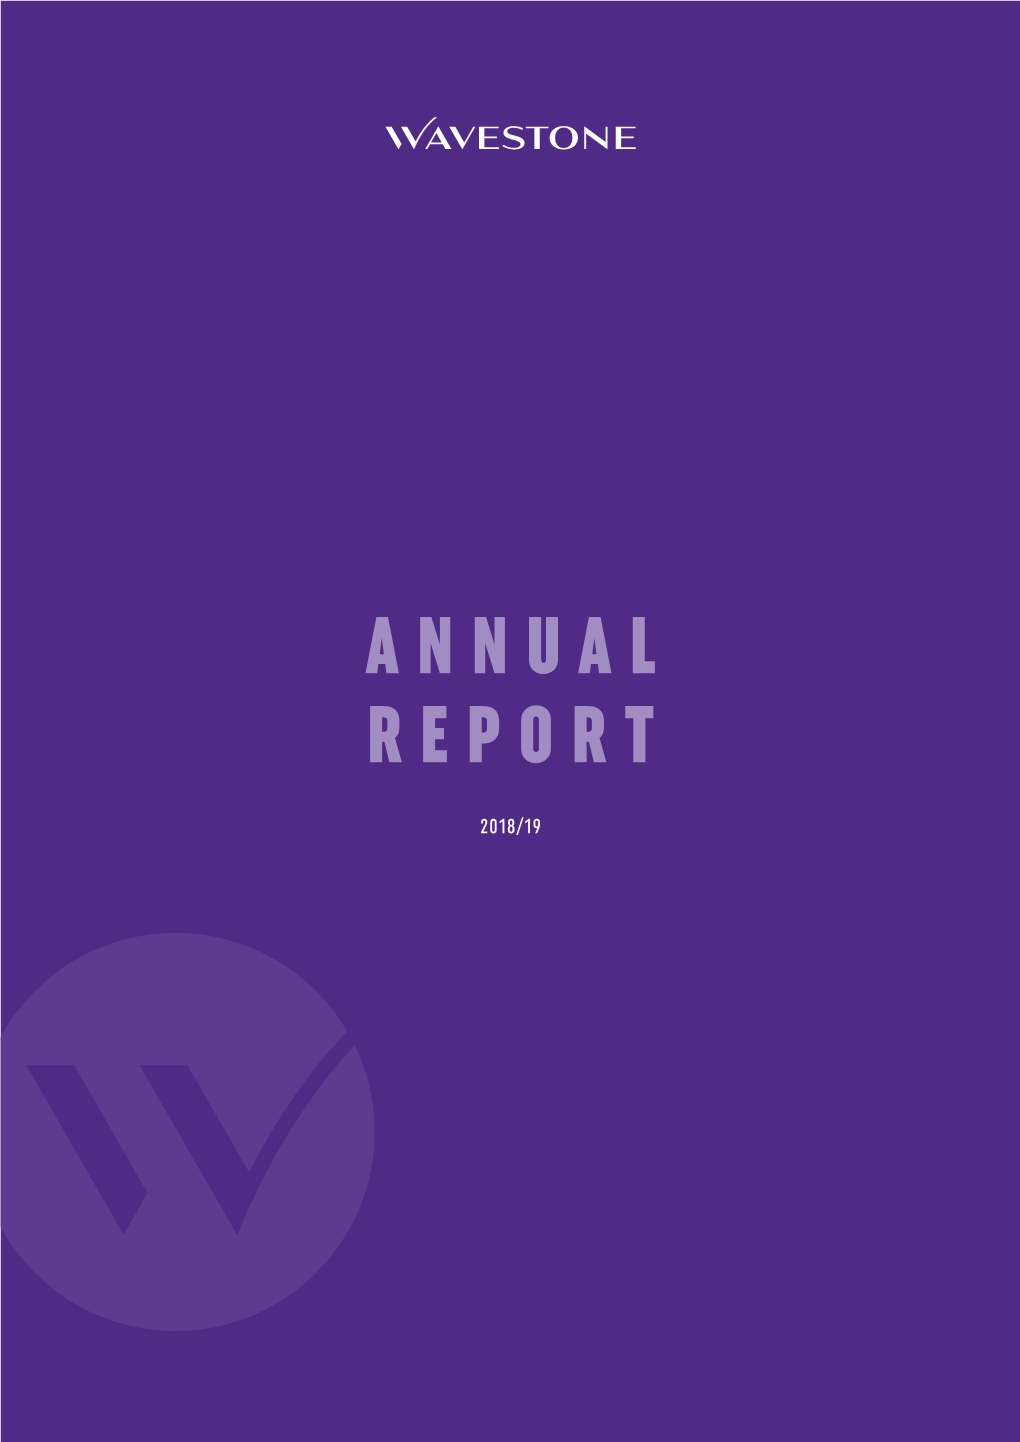 PDF 2 August 2019 2018/19 Annual Report